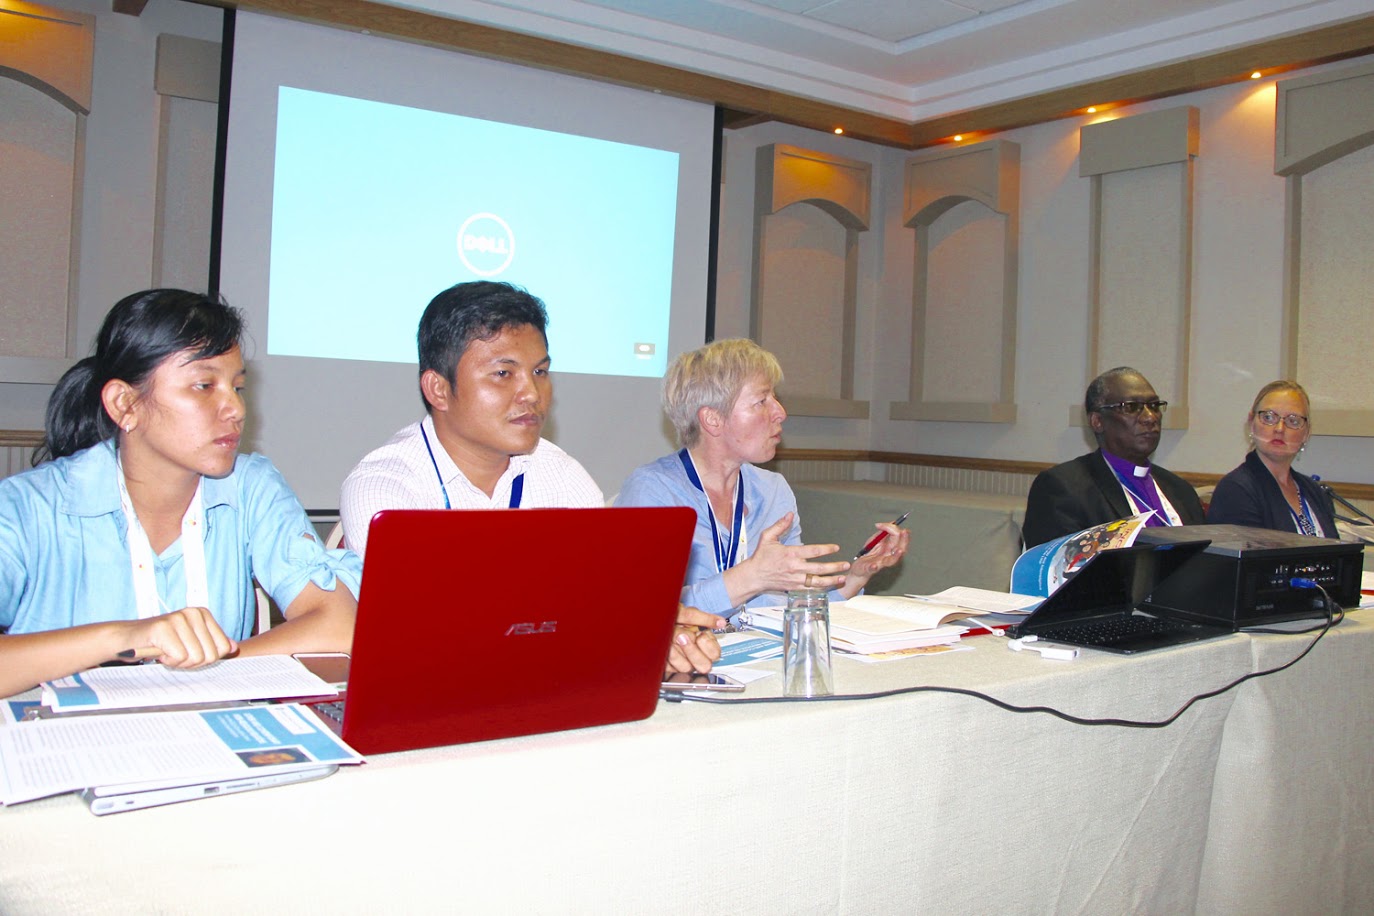 (L-R) Ms. Febrisa Silaban, Rev. Hesron Sihombing, Rev. Dr. Maria Stettner, Presiding Bishop Frederick Shoo and Ms Kathryn Lohre during the Omatala workshop – Enhancing Dialogue and Cooperation: The LWF Interfaith Network. Photo: LWF/S. Lawrence